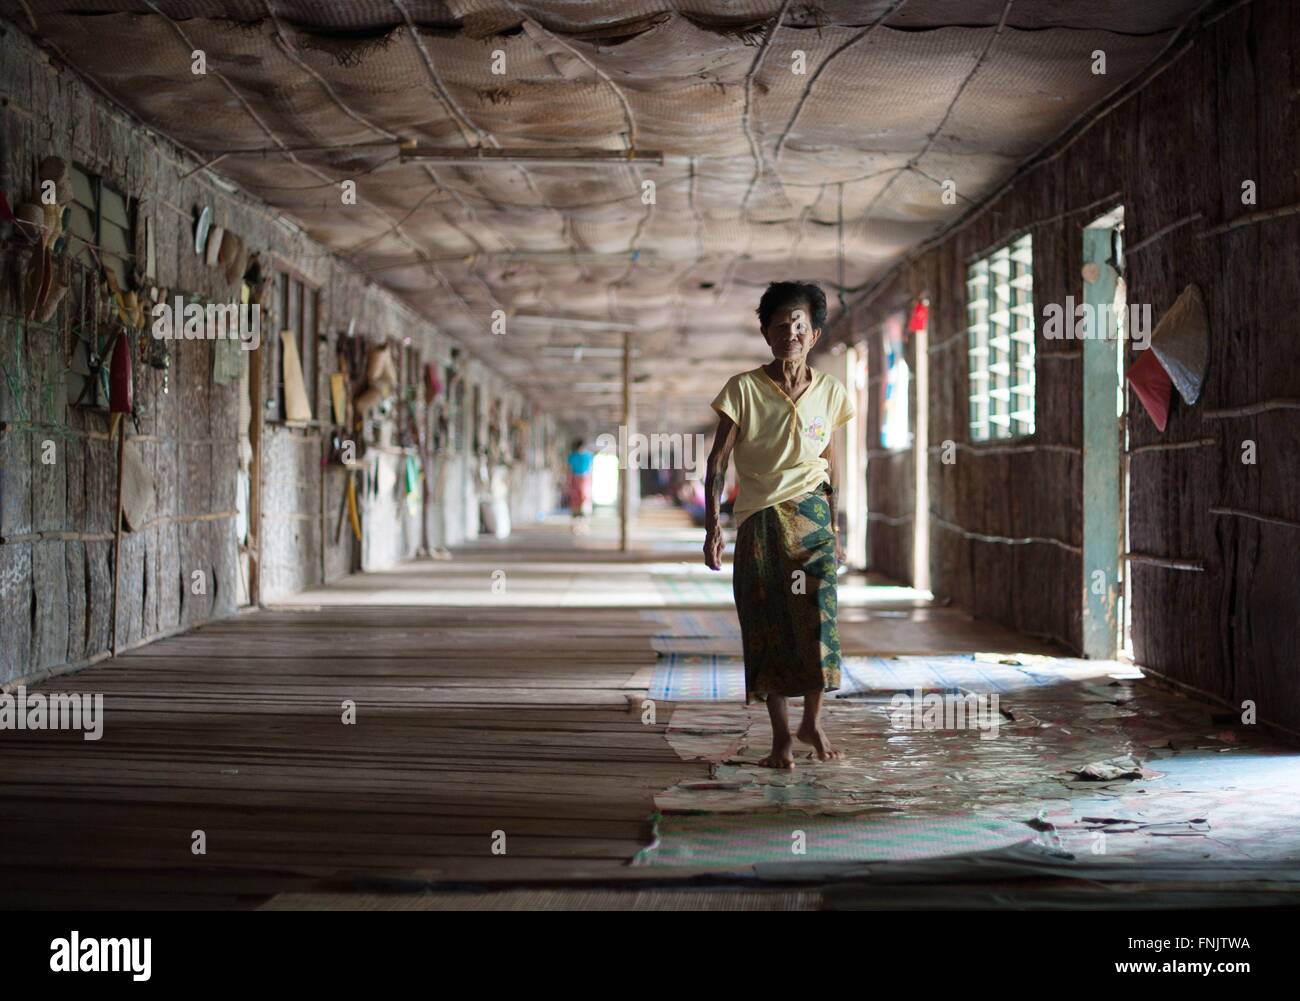 An Iban woman inside a traditional Iban longhouse near Lubok Antu, Malaysia, on 23 October 2014. Photo: Sebastian Kahnert - NO WIRE SERVICE - Stock Photo